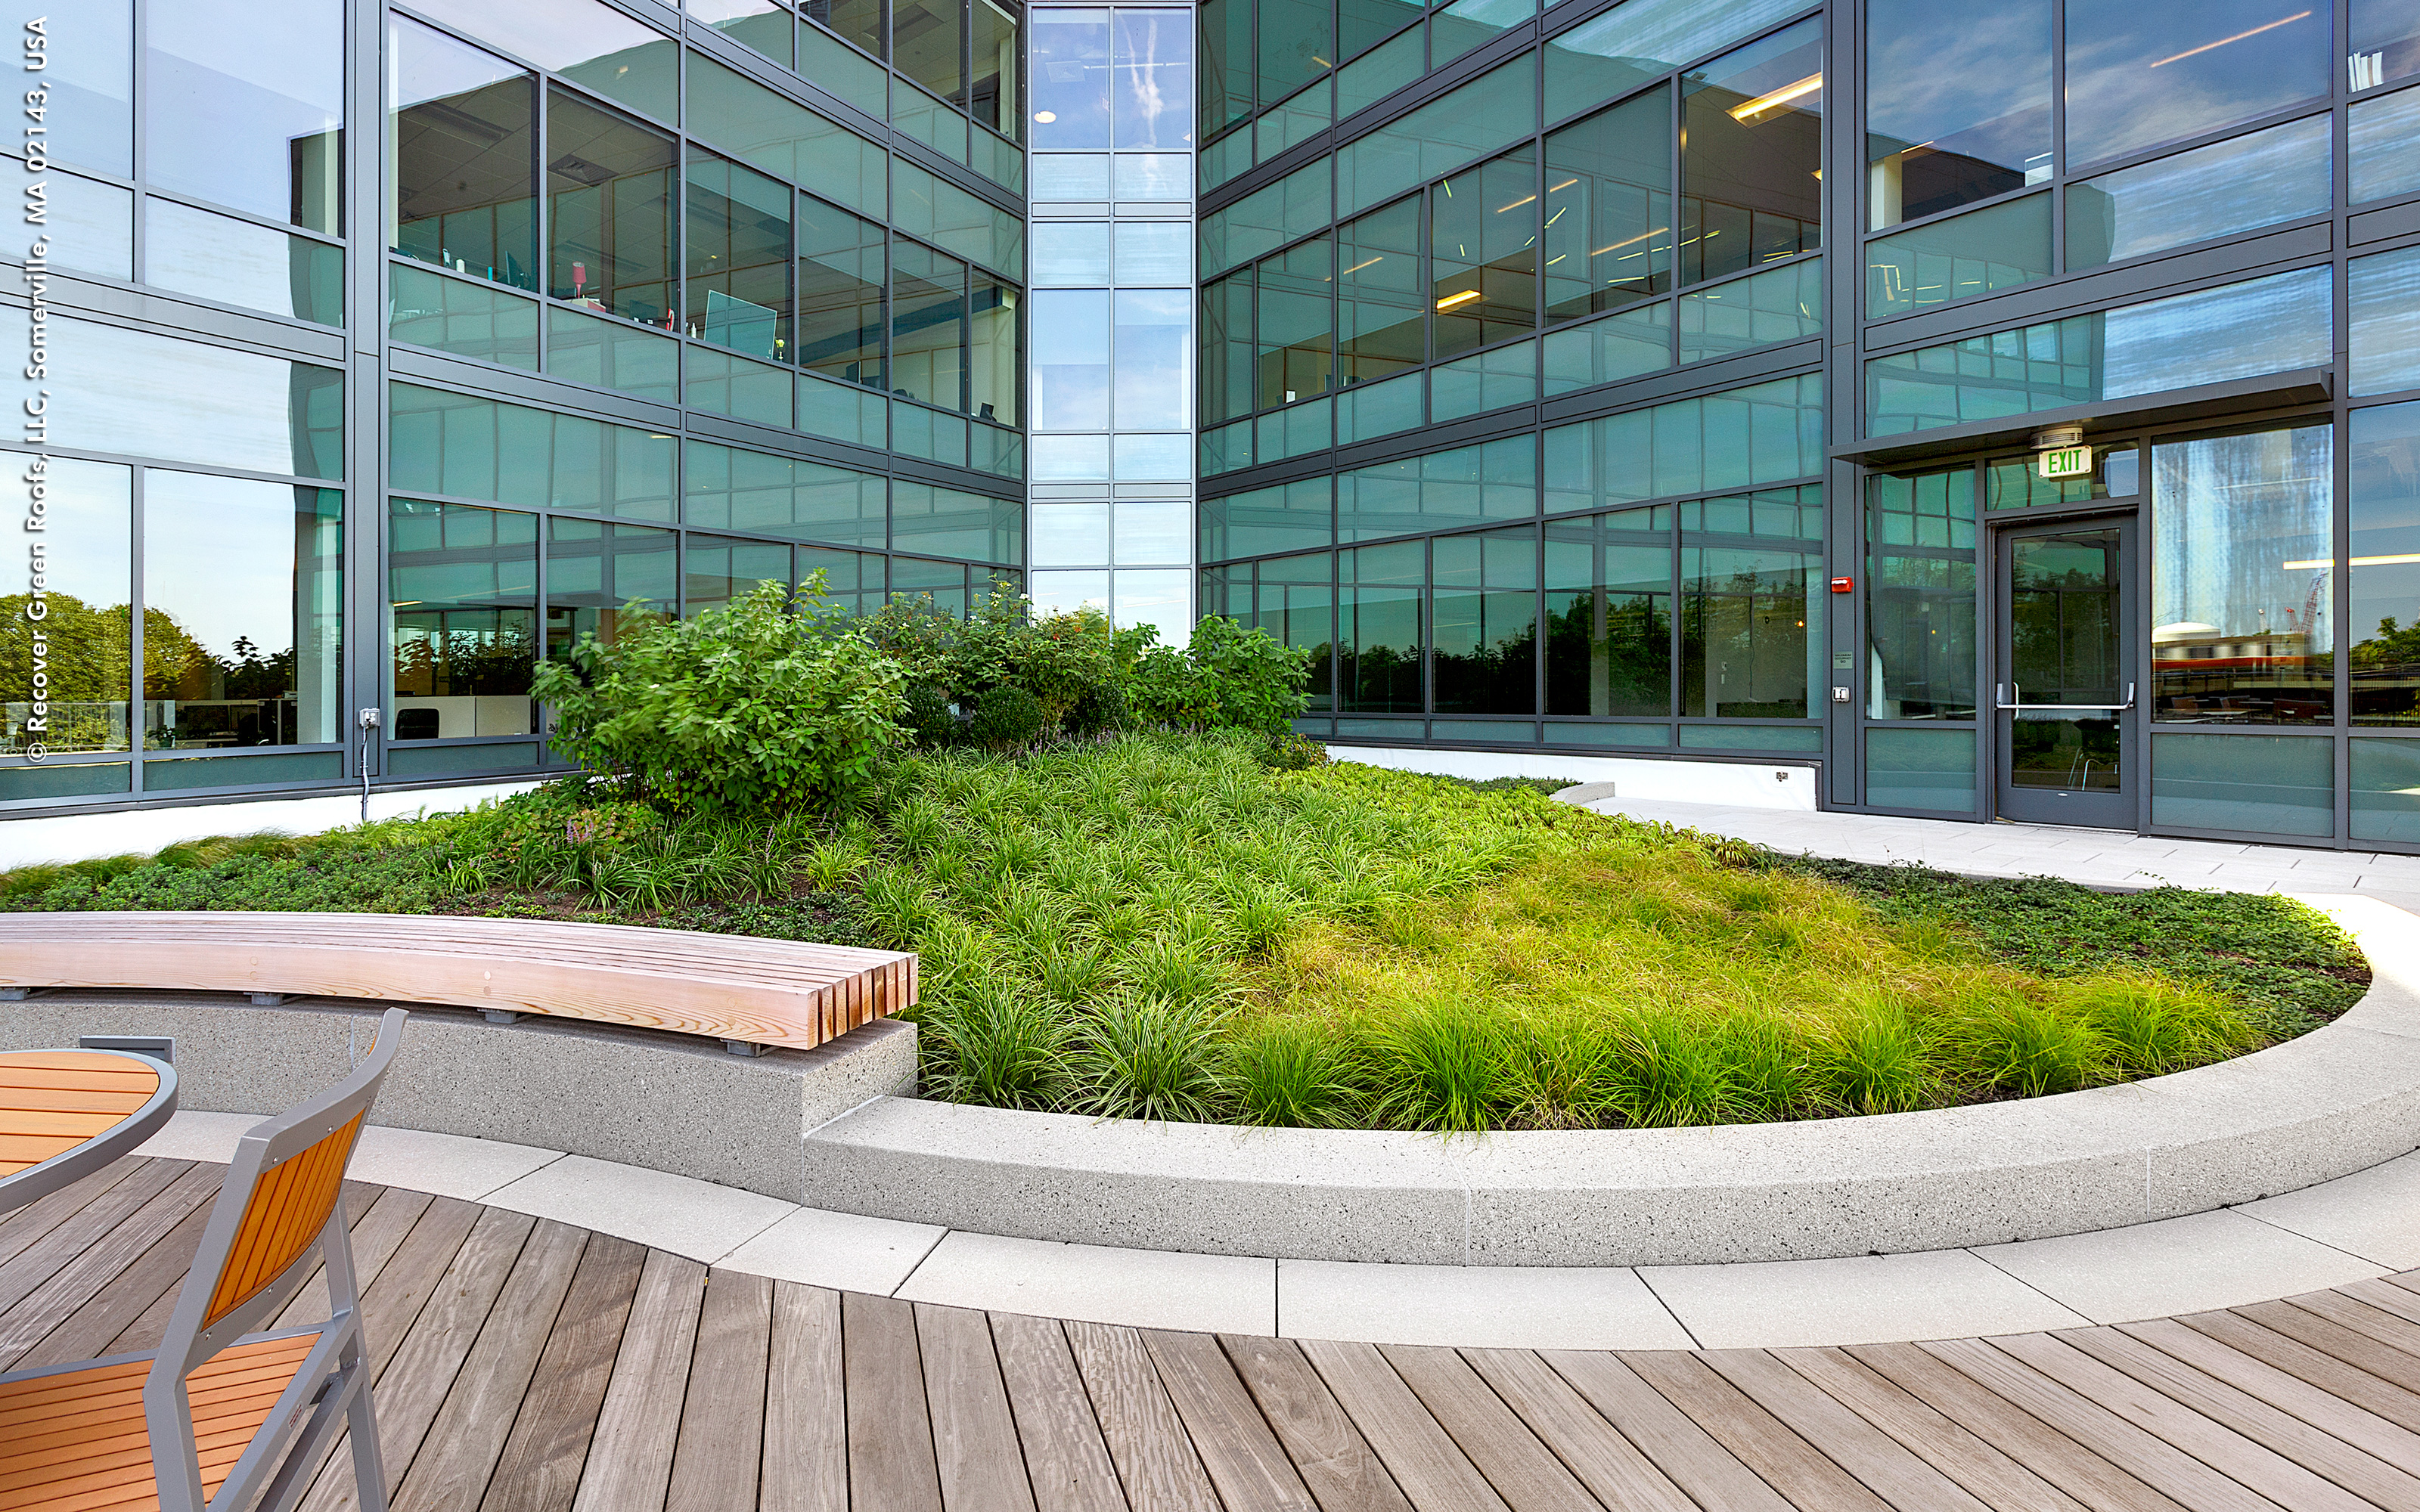 SPANX Corporate Headquarters Landscape Rooftop with ForeverLawn